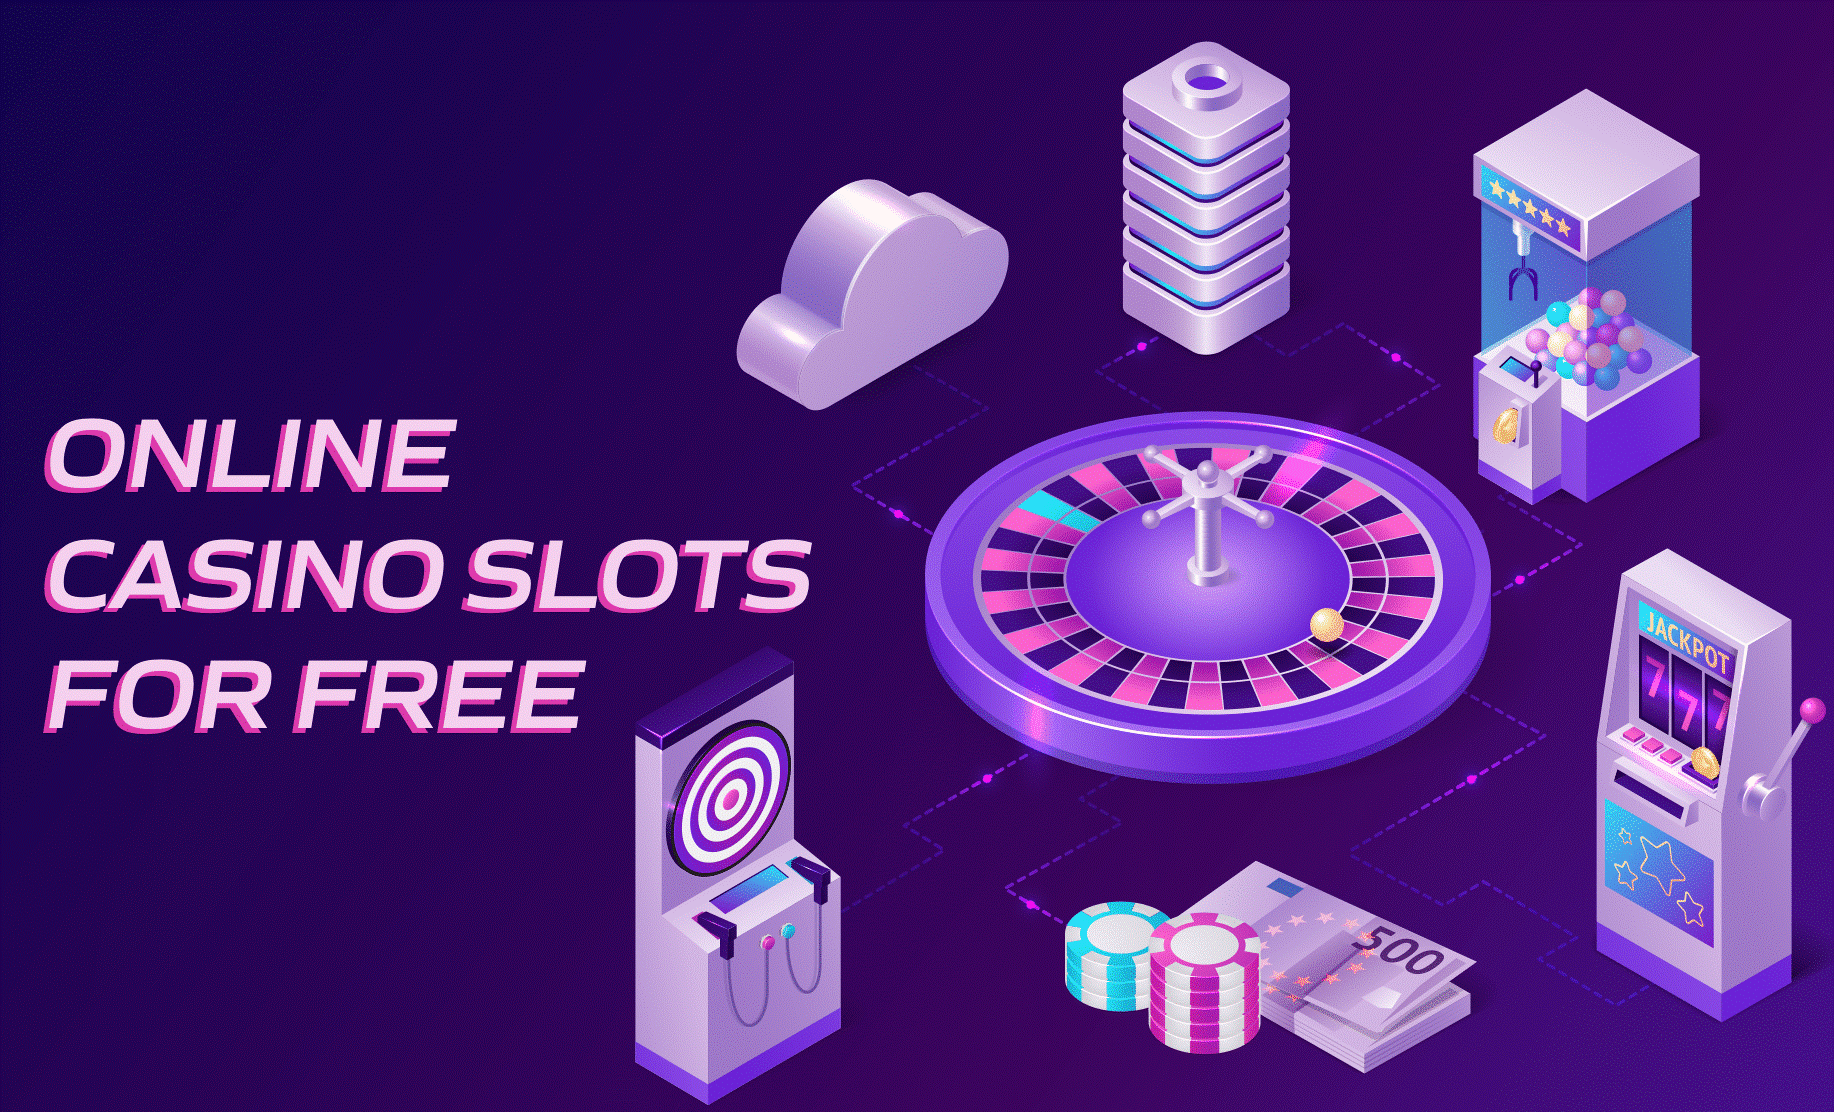 Online Casino Slots For Free